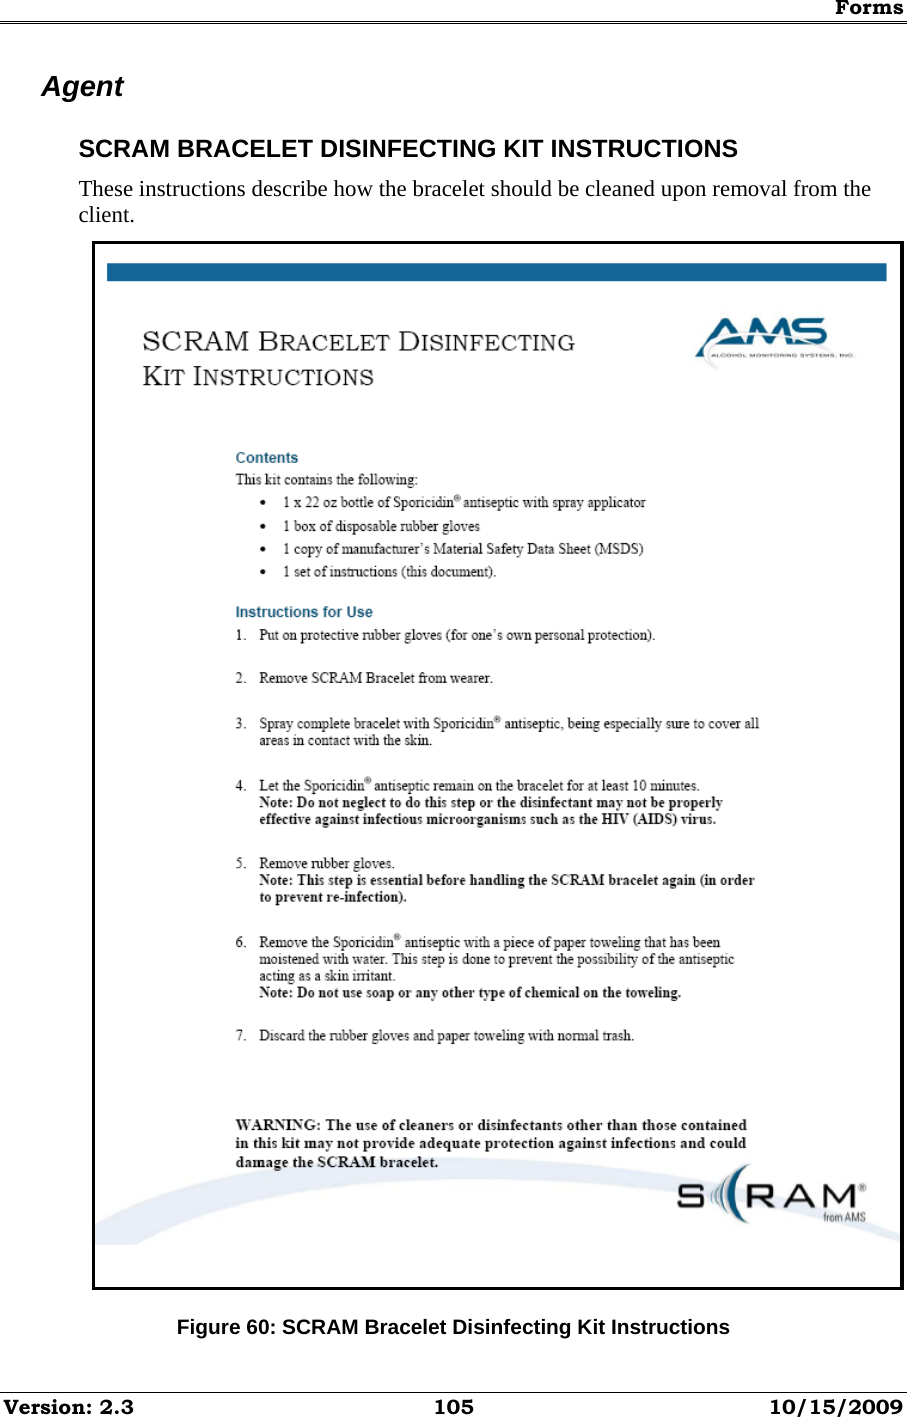 Forms Version: 2.3  105  10/15/2009 Agent SCRAM BRACELET DISINFECTING KIT INSTRUCTIONS These instructions describe how the bracelet should be cleaned upon removal from the client.  Figure 60: SCRAM Bracelet Disinfecting Kit Instructions 